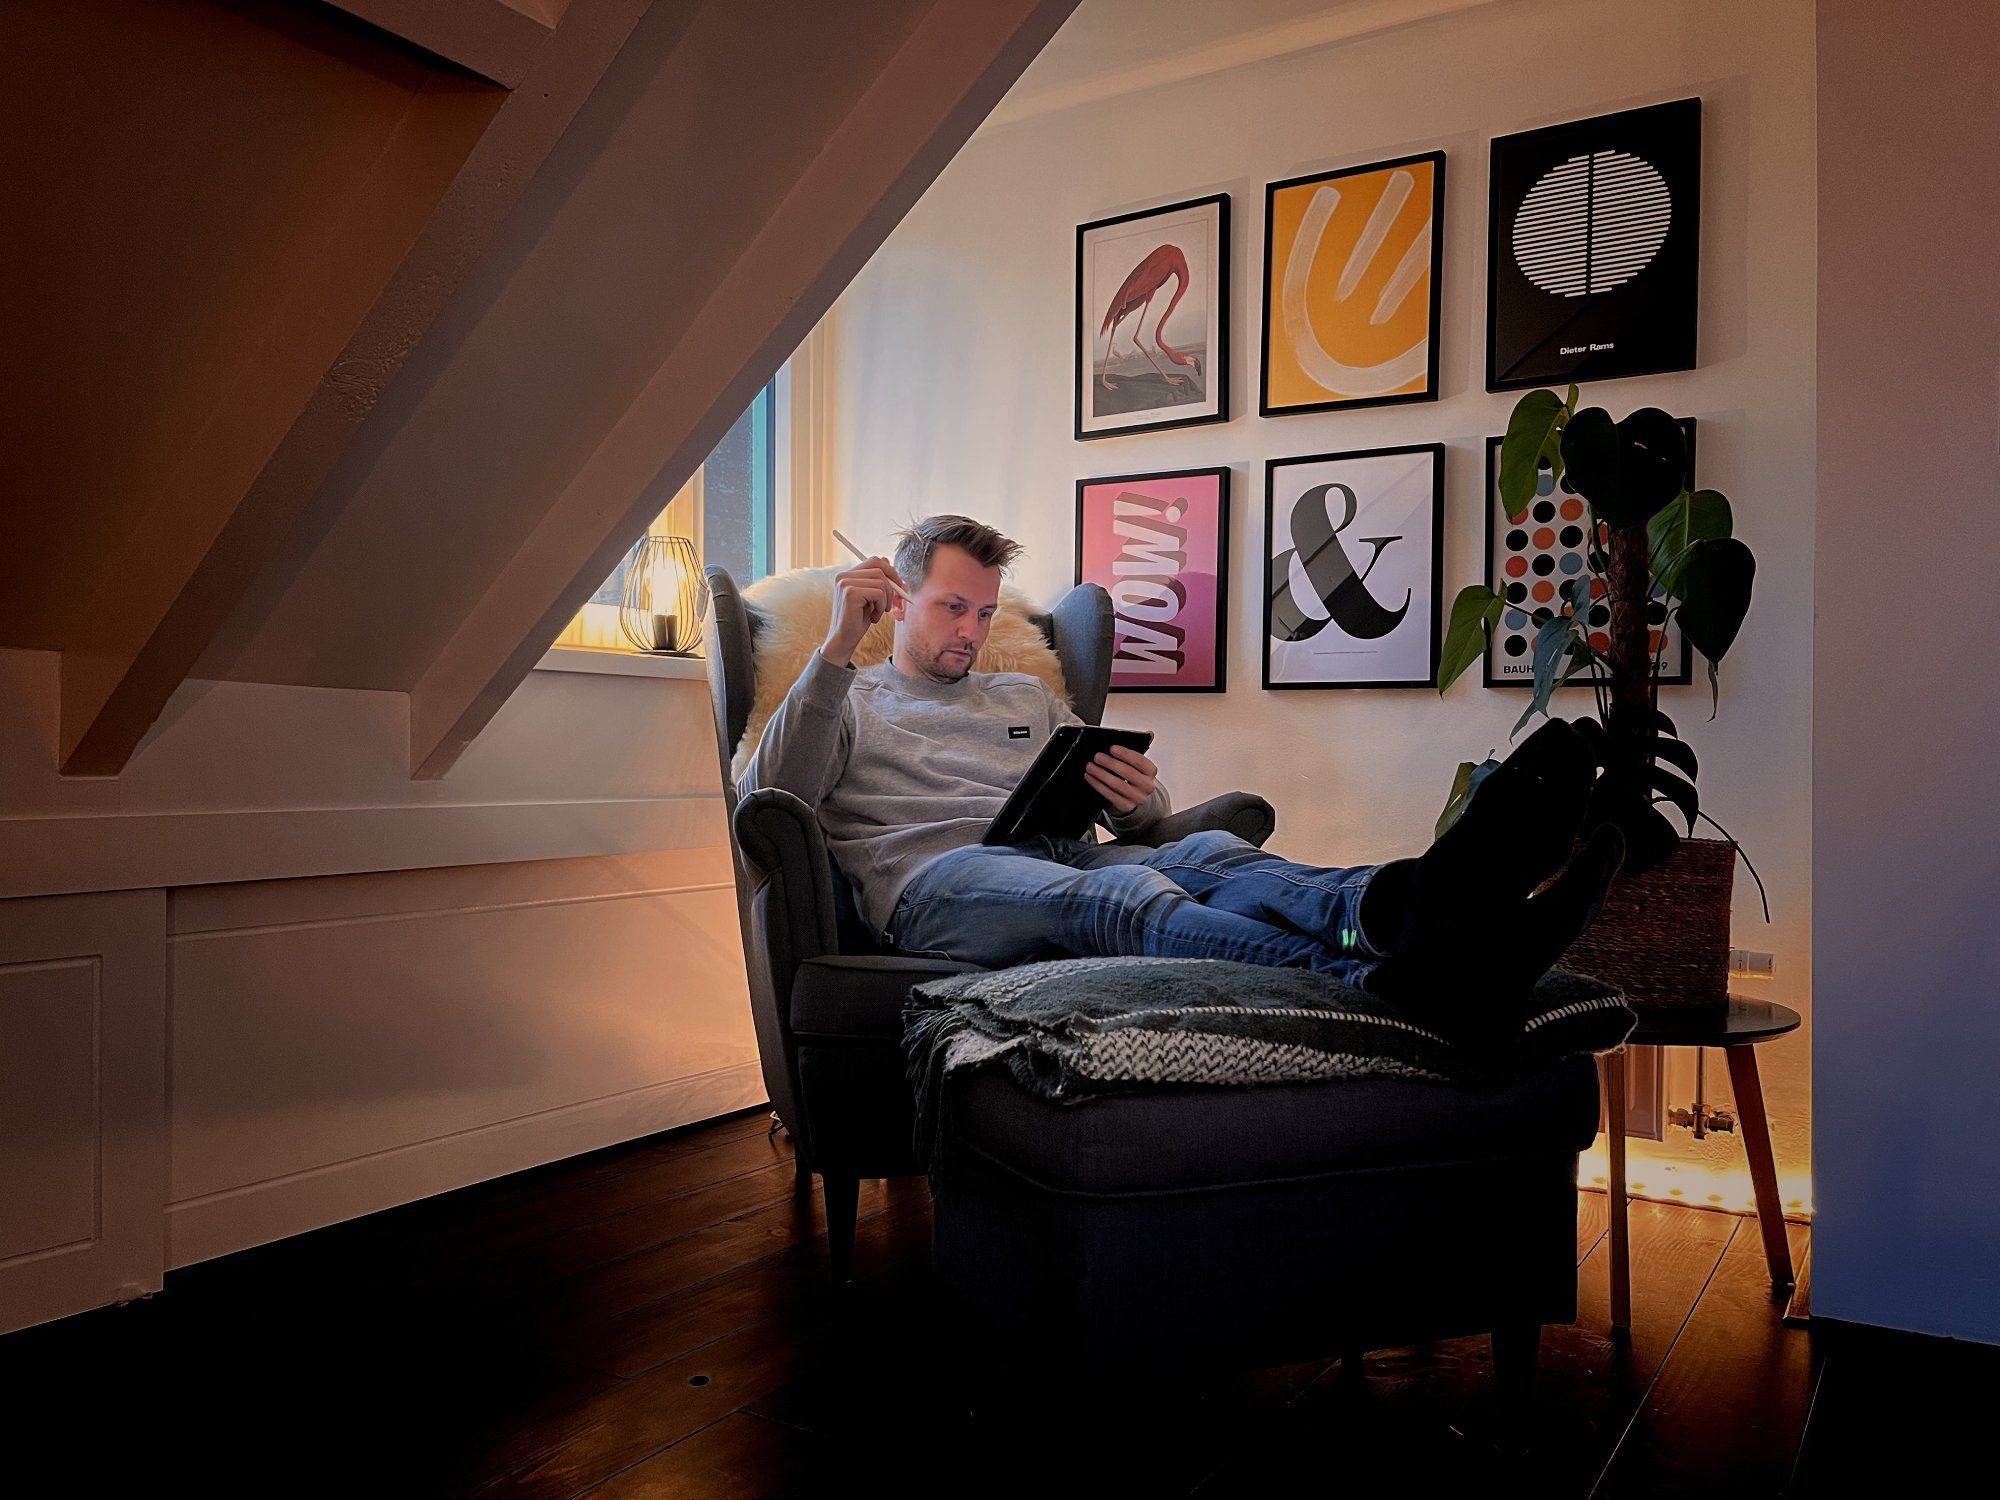 Wouter de Bres in his favourite wingchair at his attic home office in the Netherlands